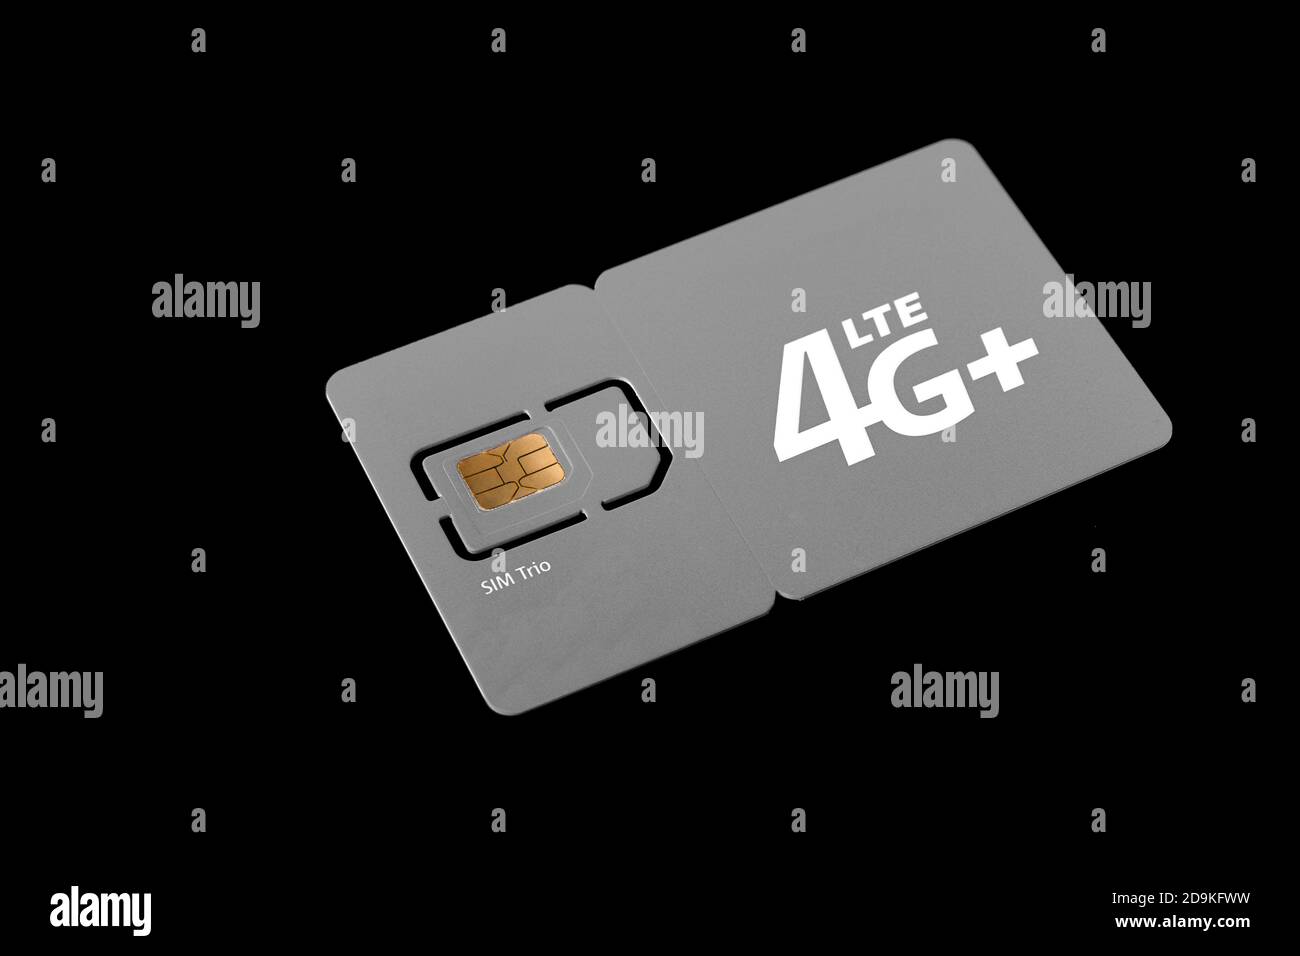 Dimensions of sim cards. Standard, micro and nano SIM card collected in card. SIM card for phone on a black background. Stock Photo